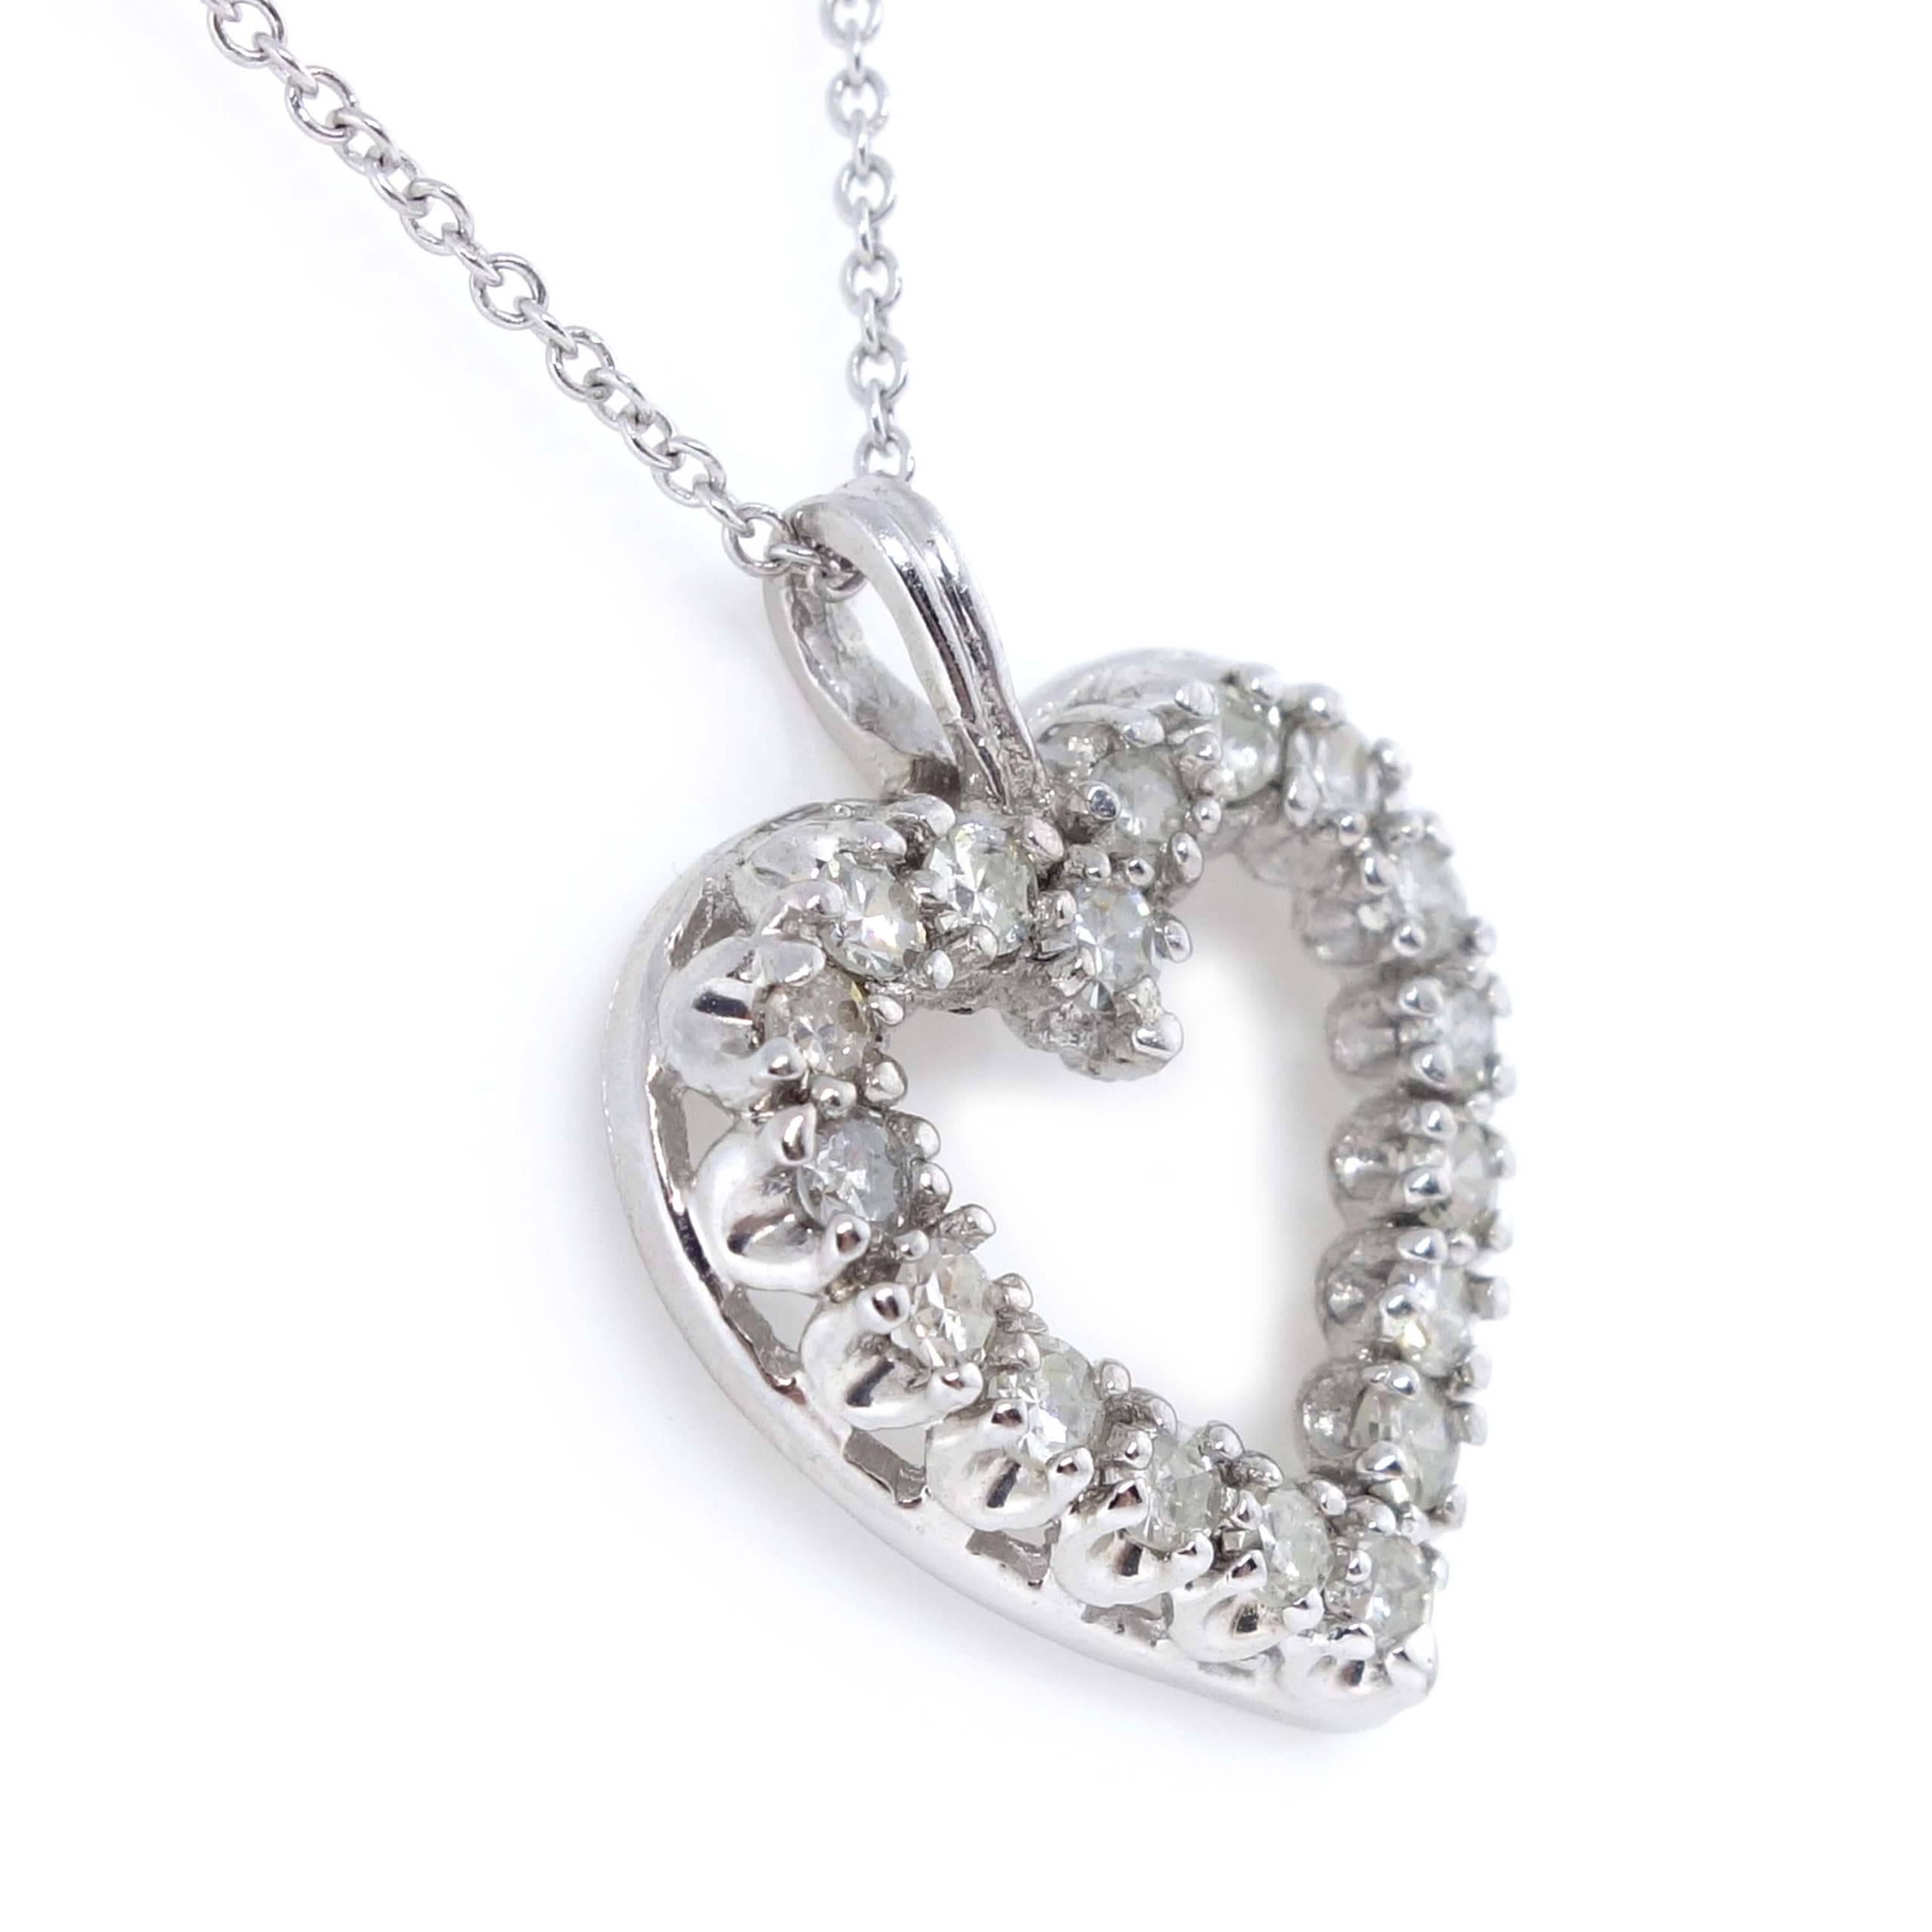 Heart Pendant containing 17 round brilliant cut Diamonds of about 0.35 carats with a clarity of SI2 and color H. All diamonds are set in a 14k white gold pendant. The total weight of the pendant is approximately 2.06 grams.

Measurements: (W x H)